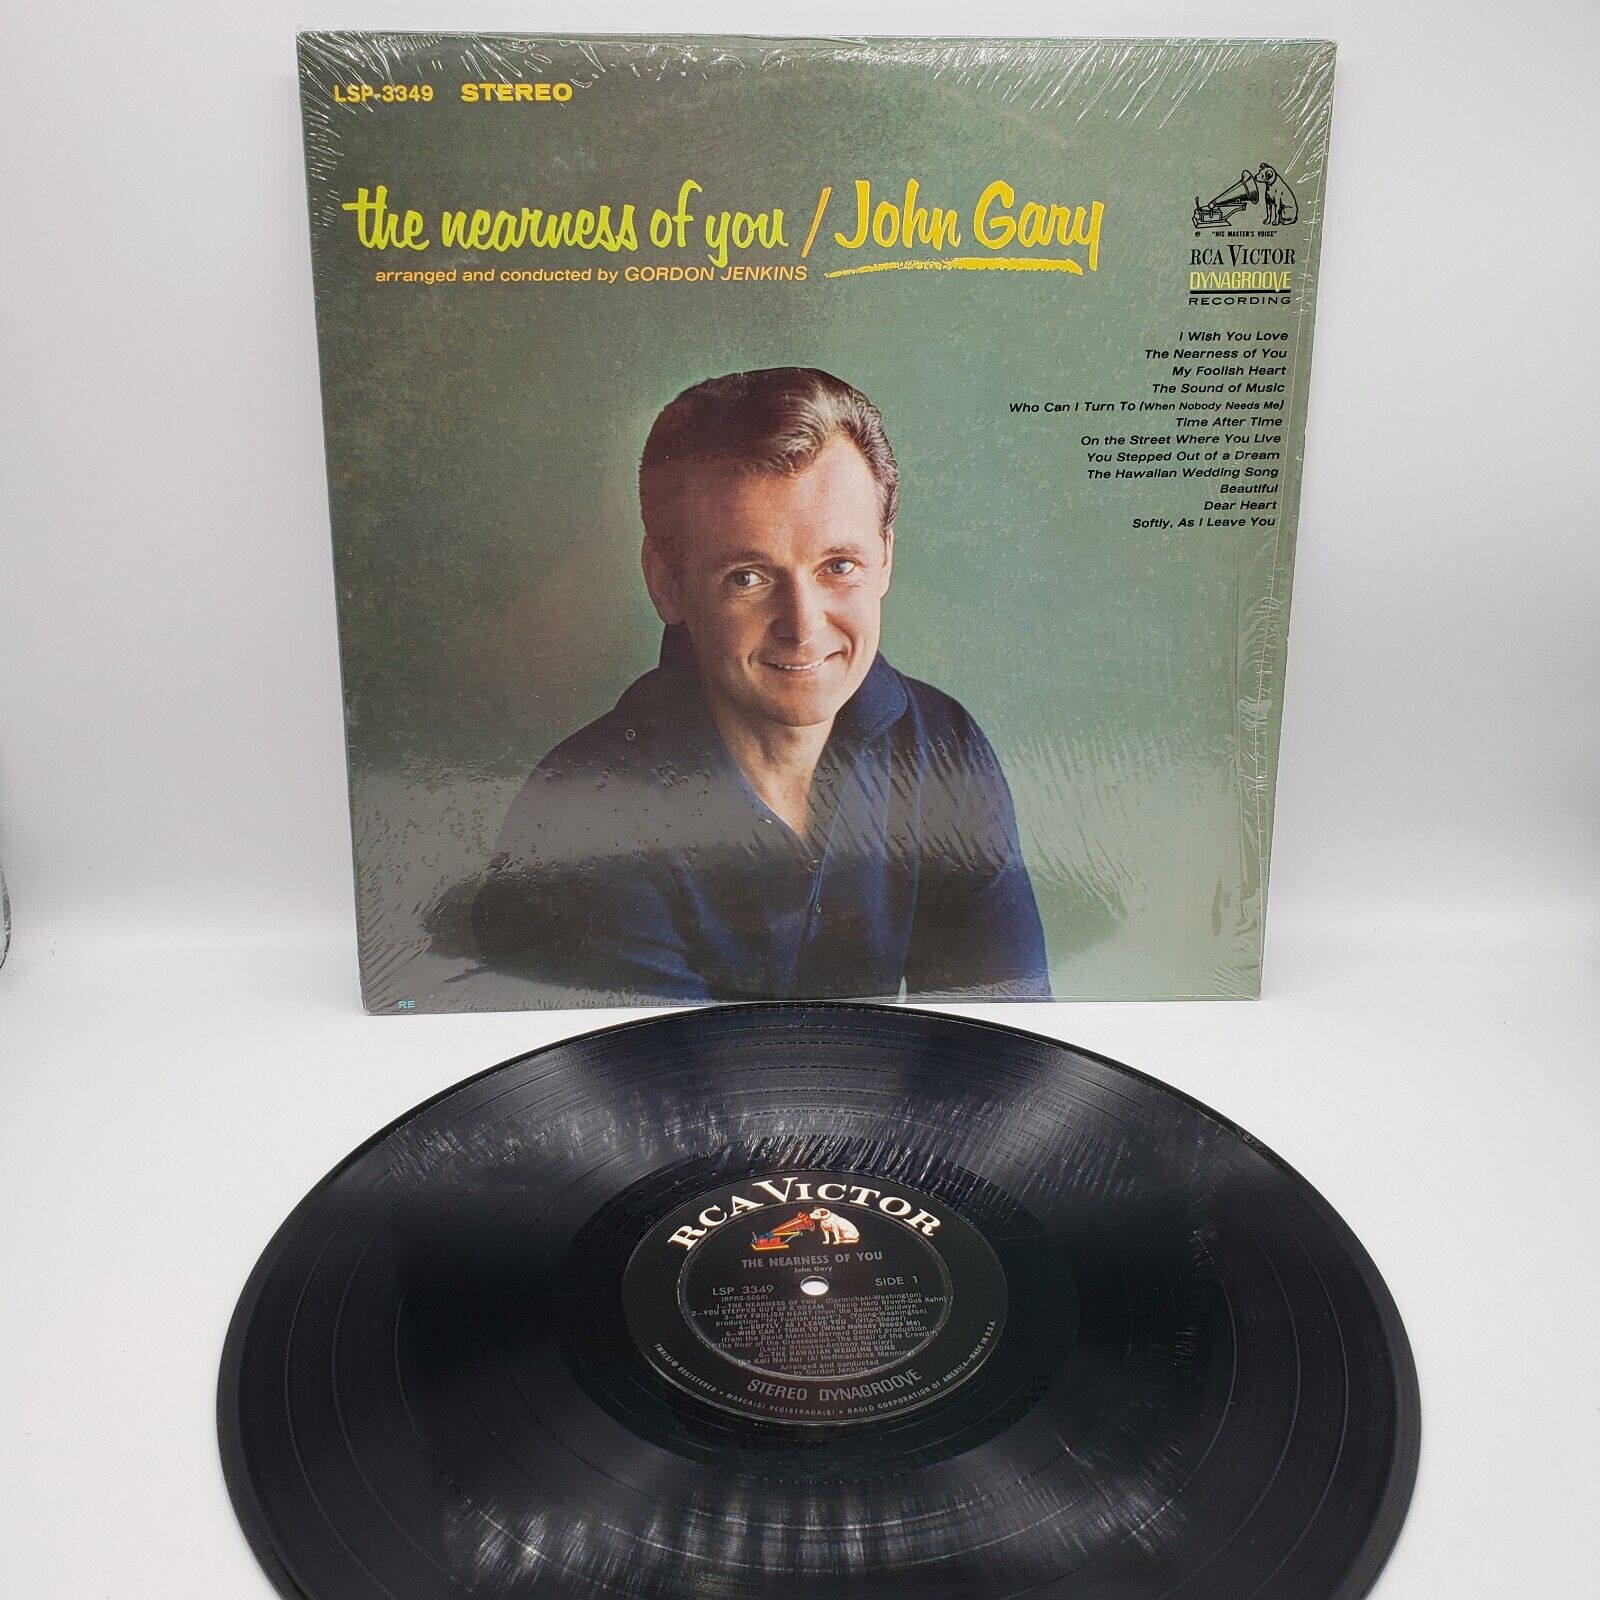 John Gary The Nearness of You on RCA Records LSP-3349 Stereo 1965